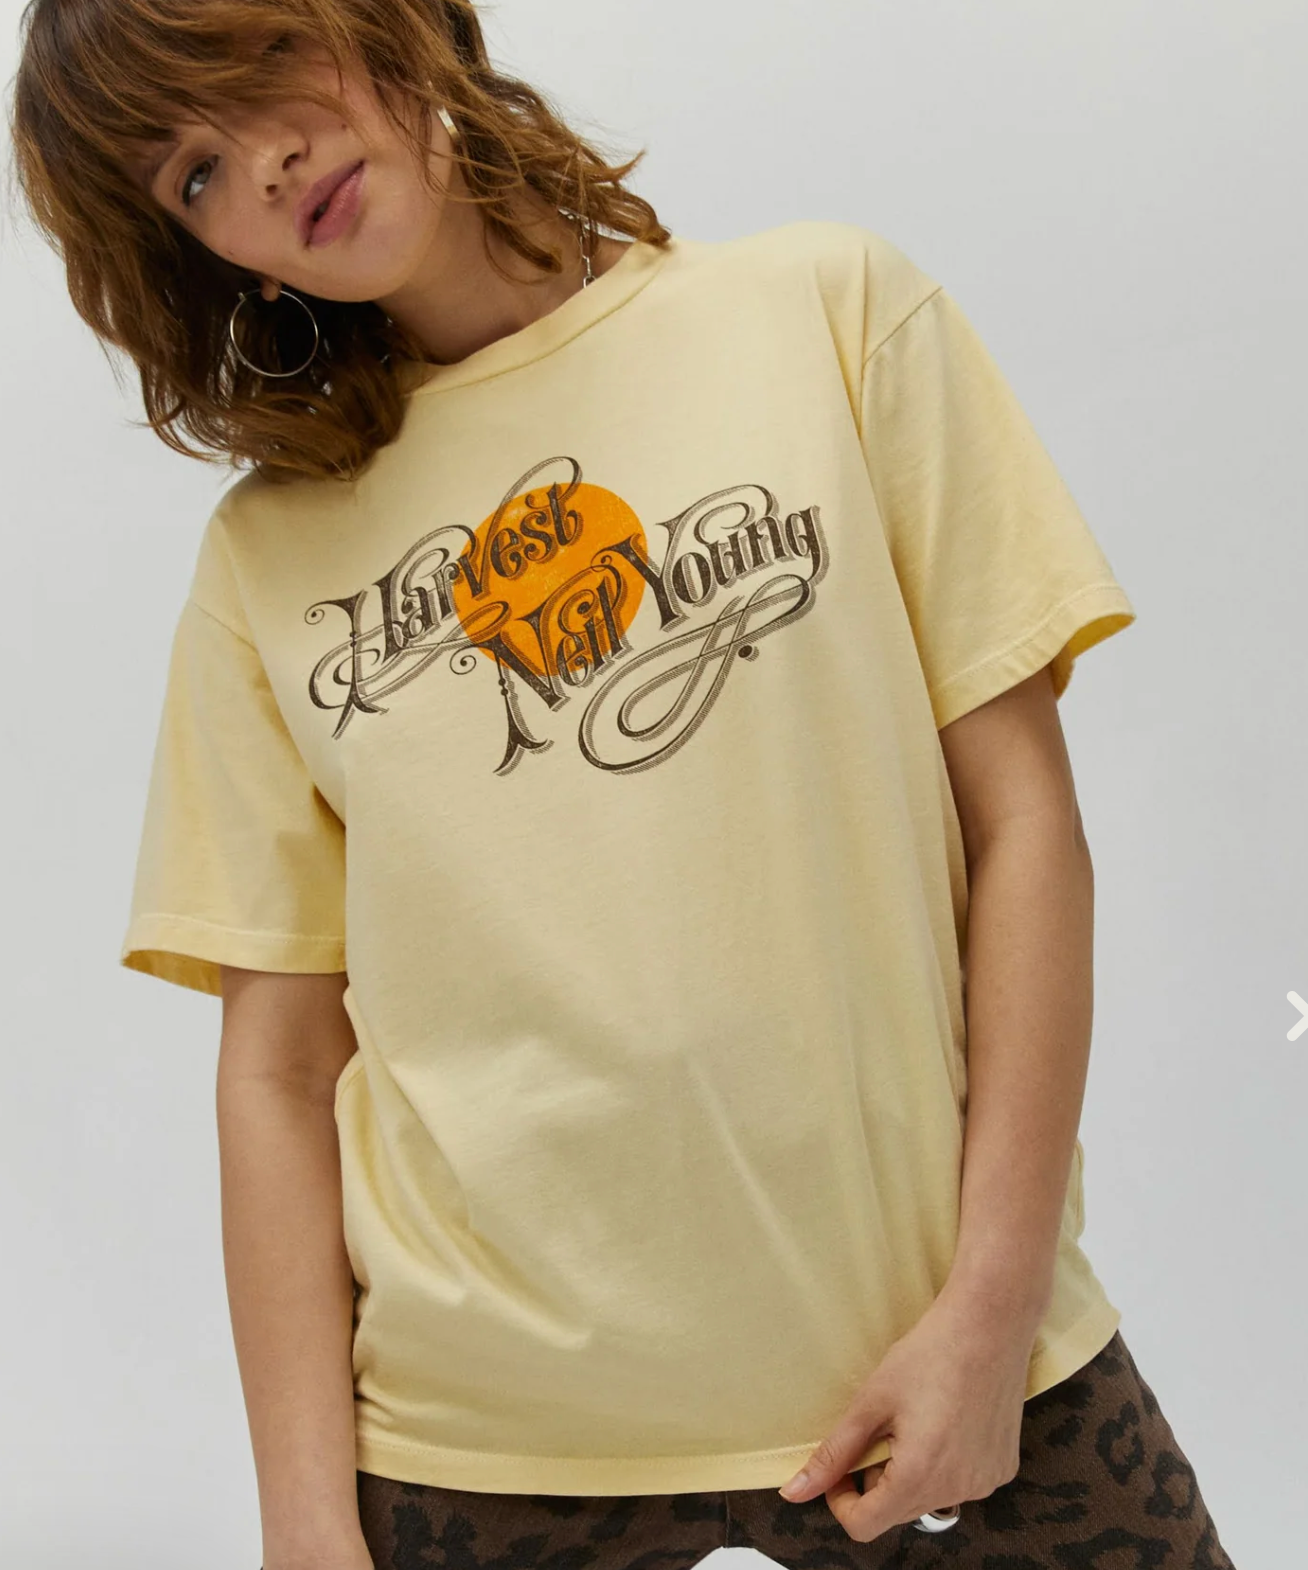 Neil Young Harvest Moon Tee